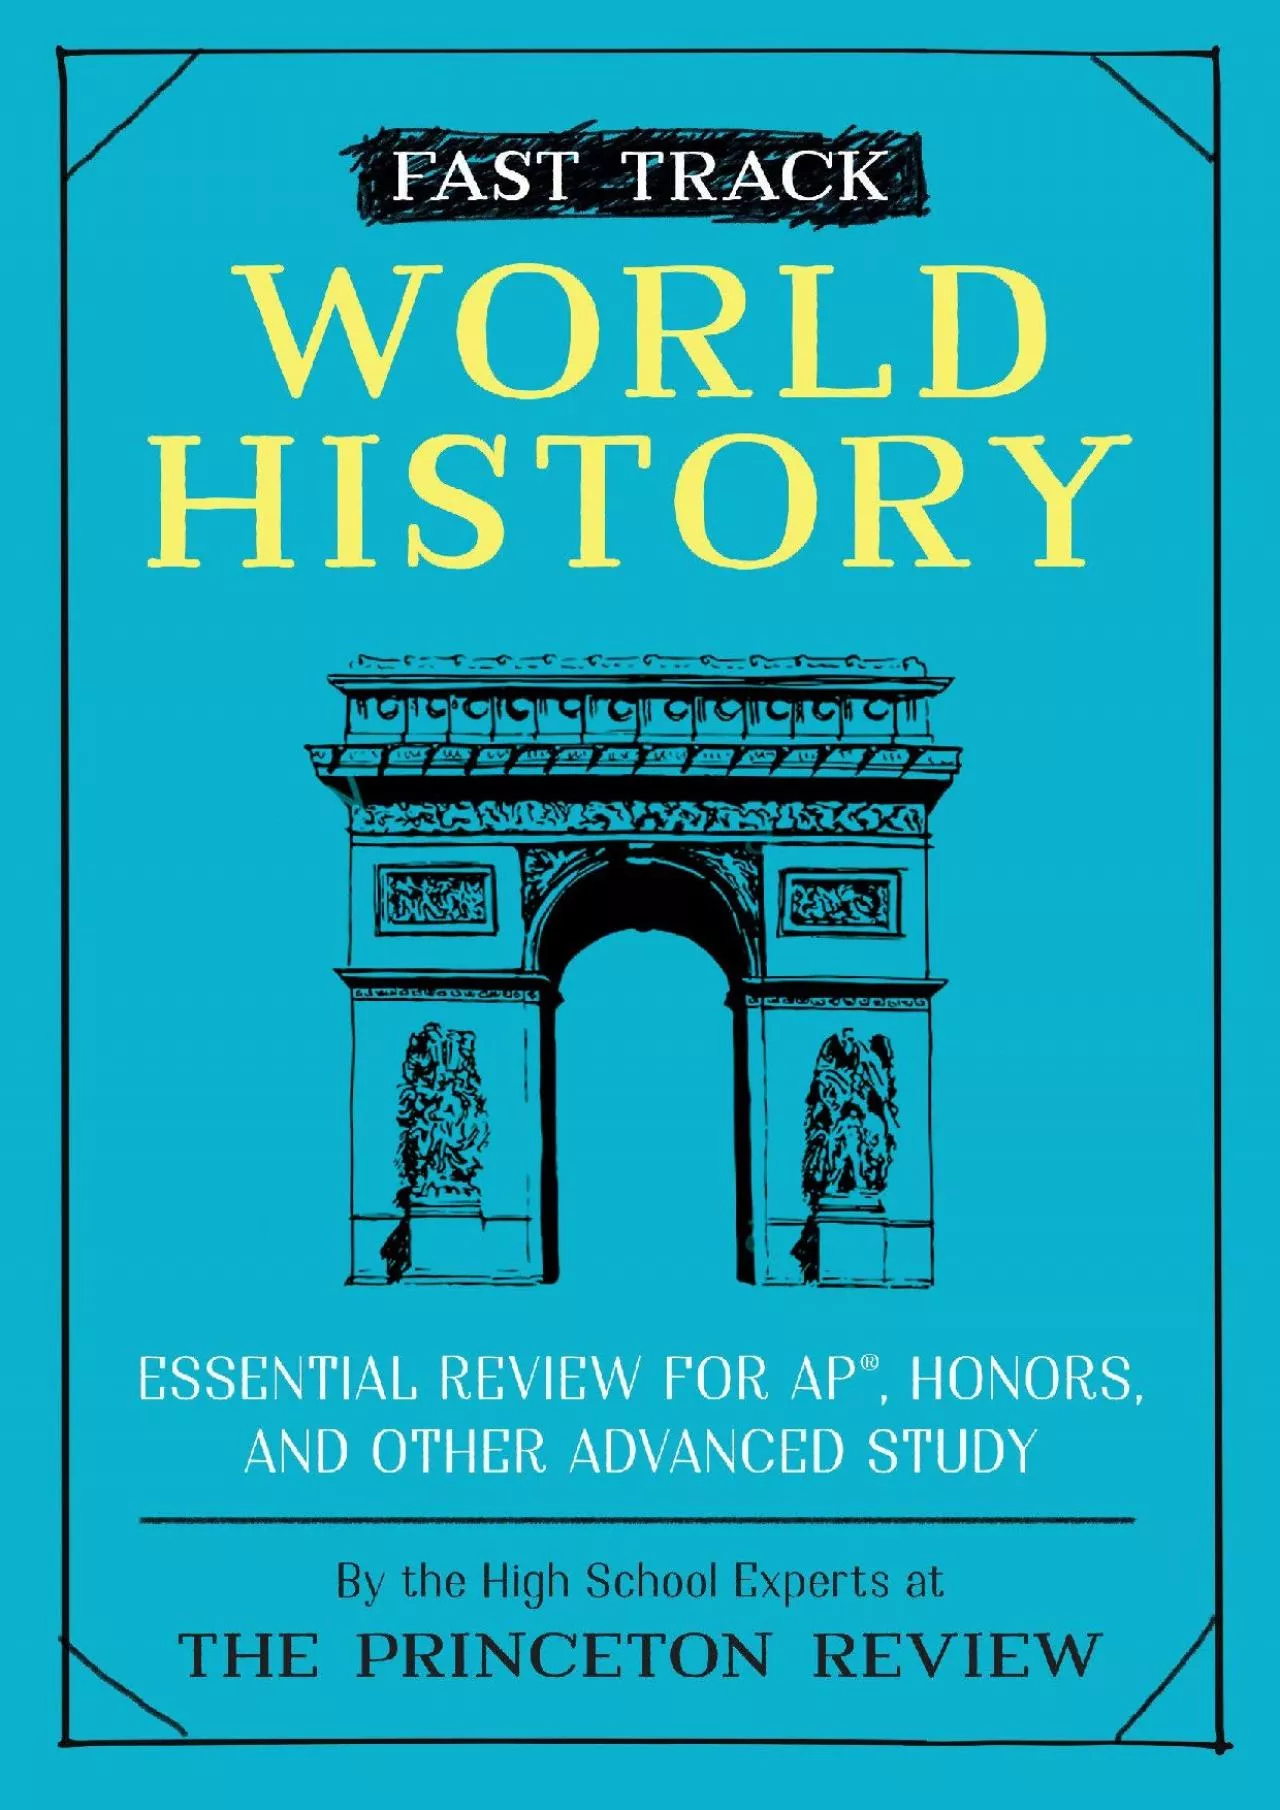 [DOWNLOAD] Fast Track: World History: Essential Review for AP, Honors, and Other Advanced